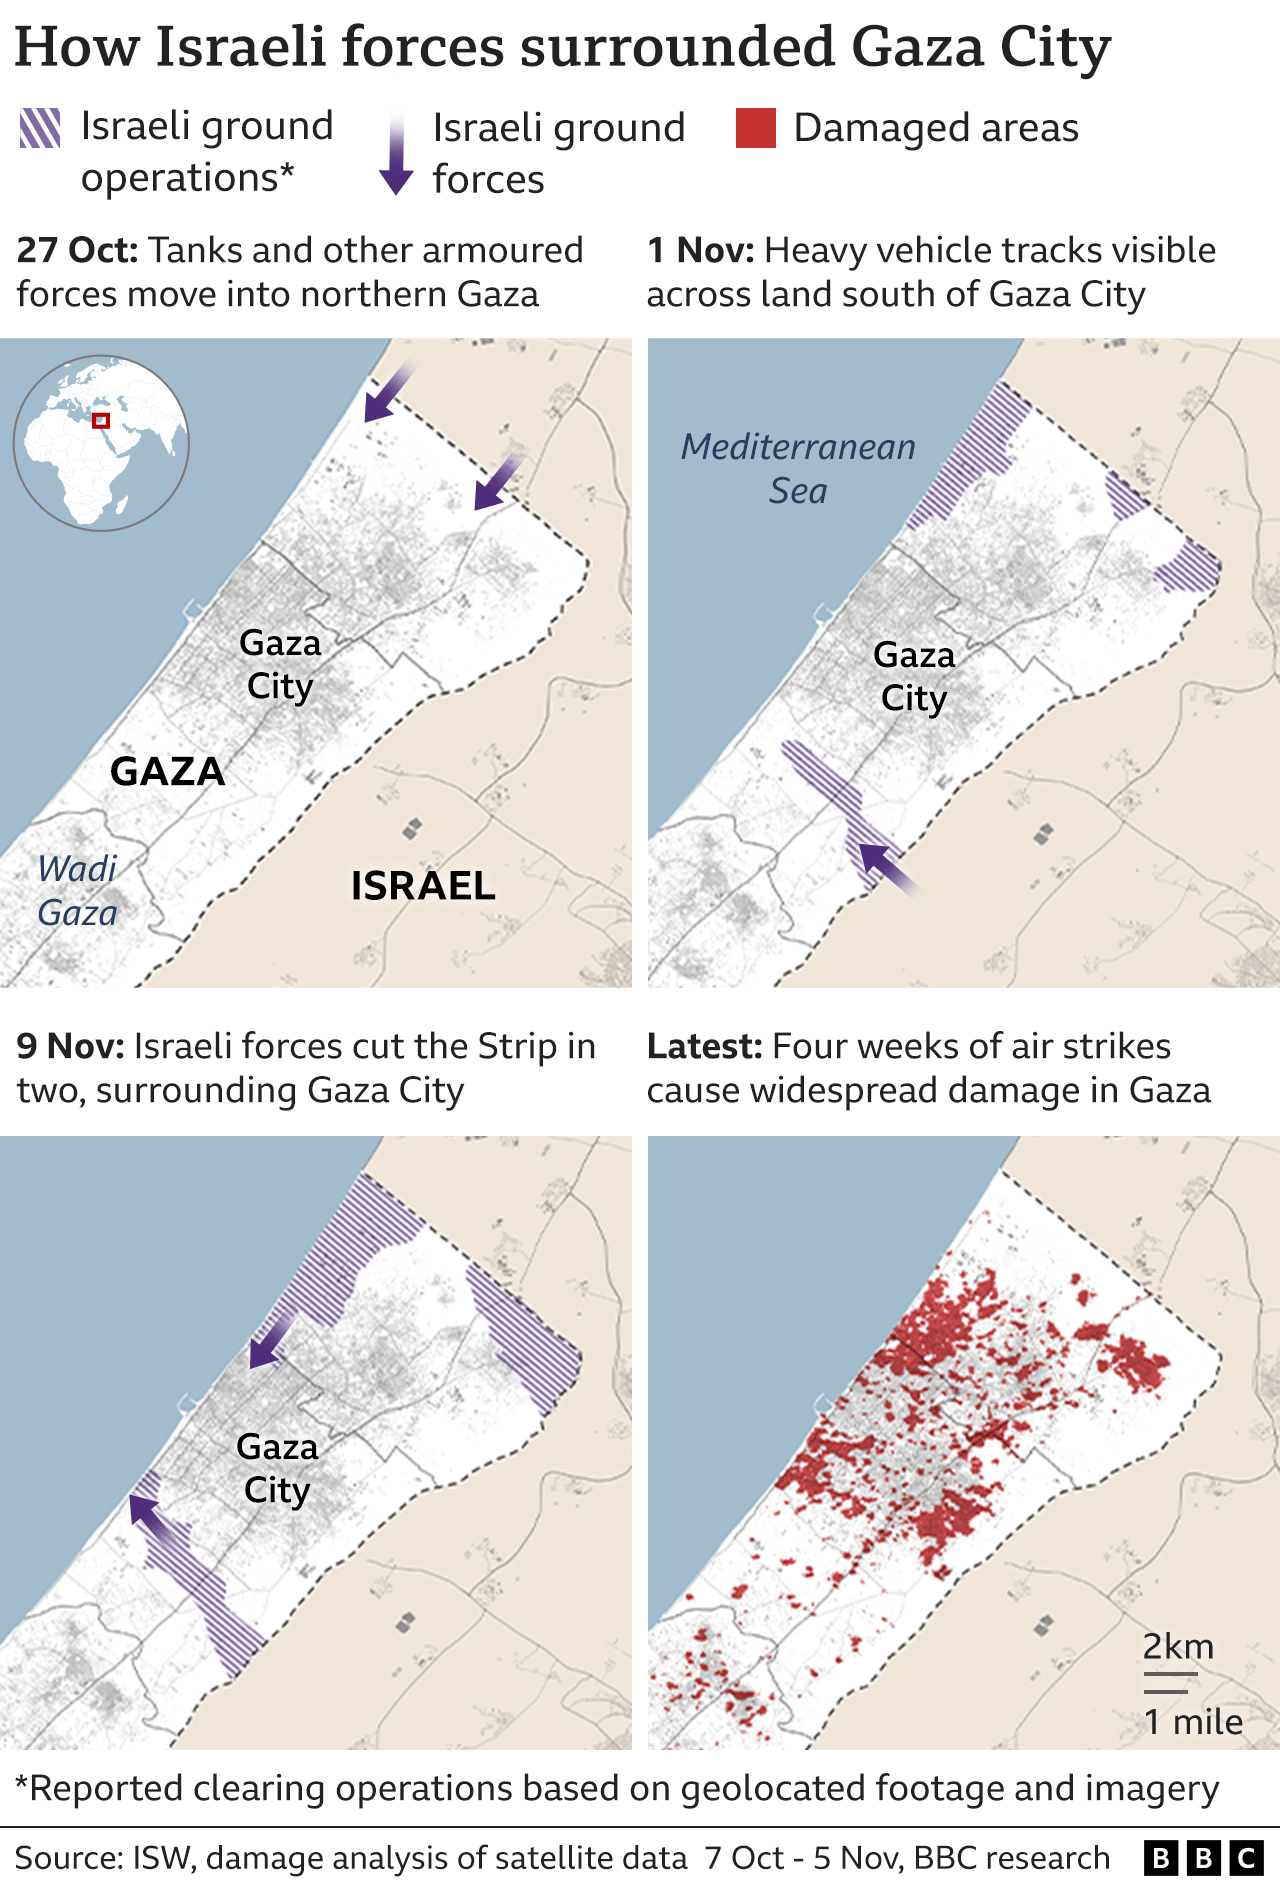 Maps of Gaza City and a timeline of how Israeli forces surrounded the city over four weeks